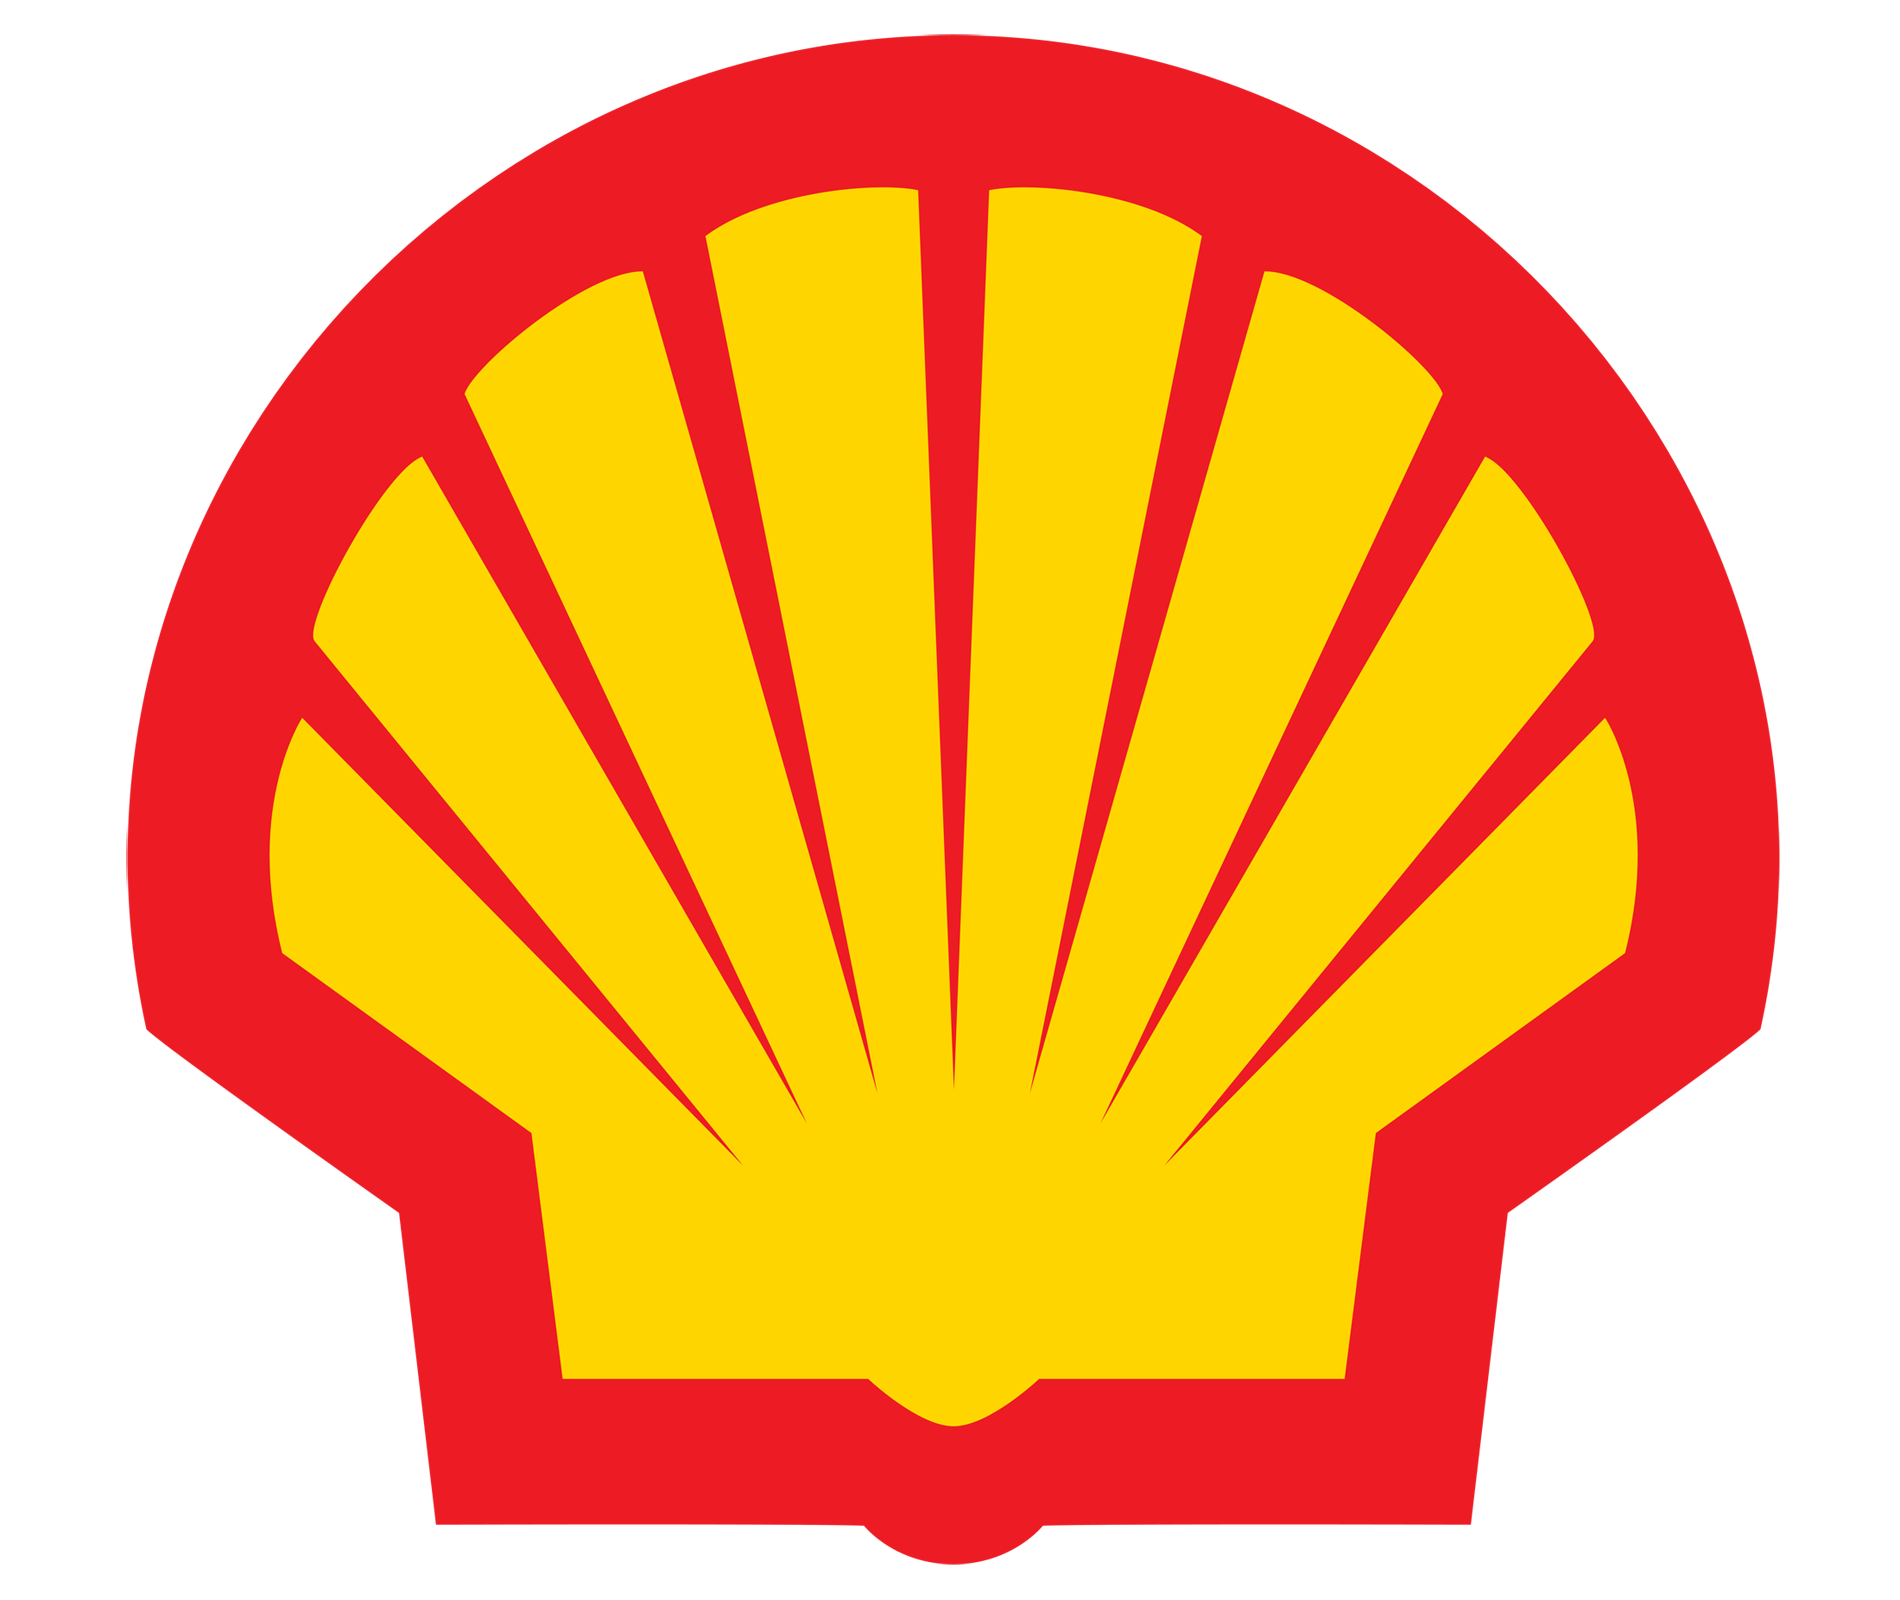 Shell announced its acquisition of EV charging company Volta